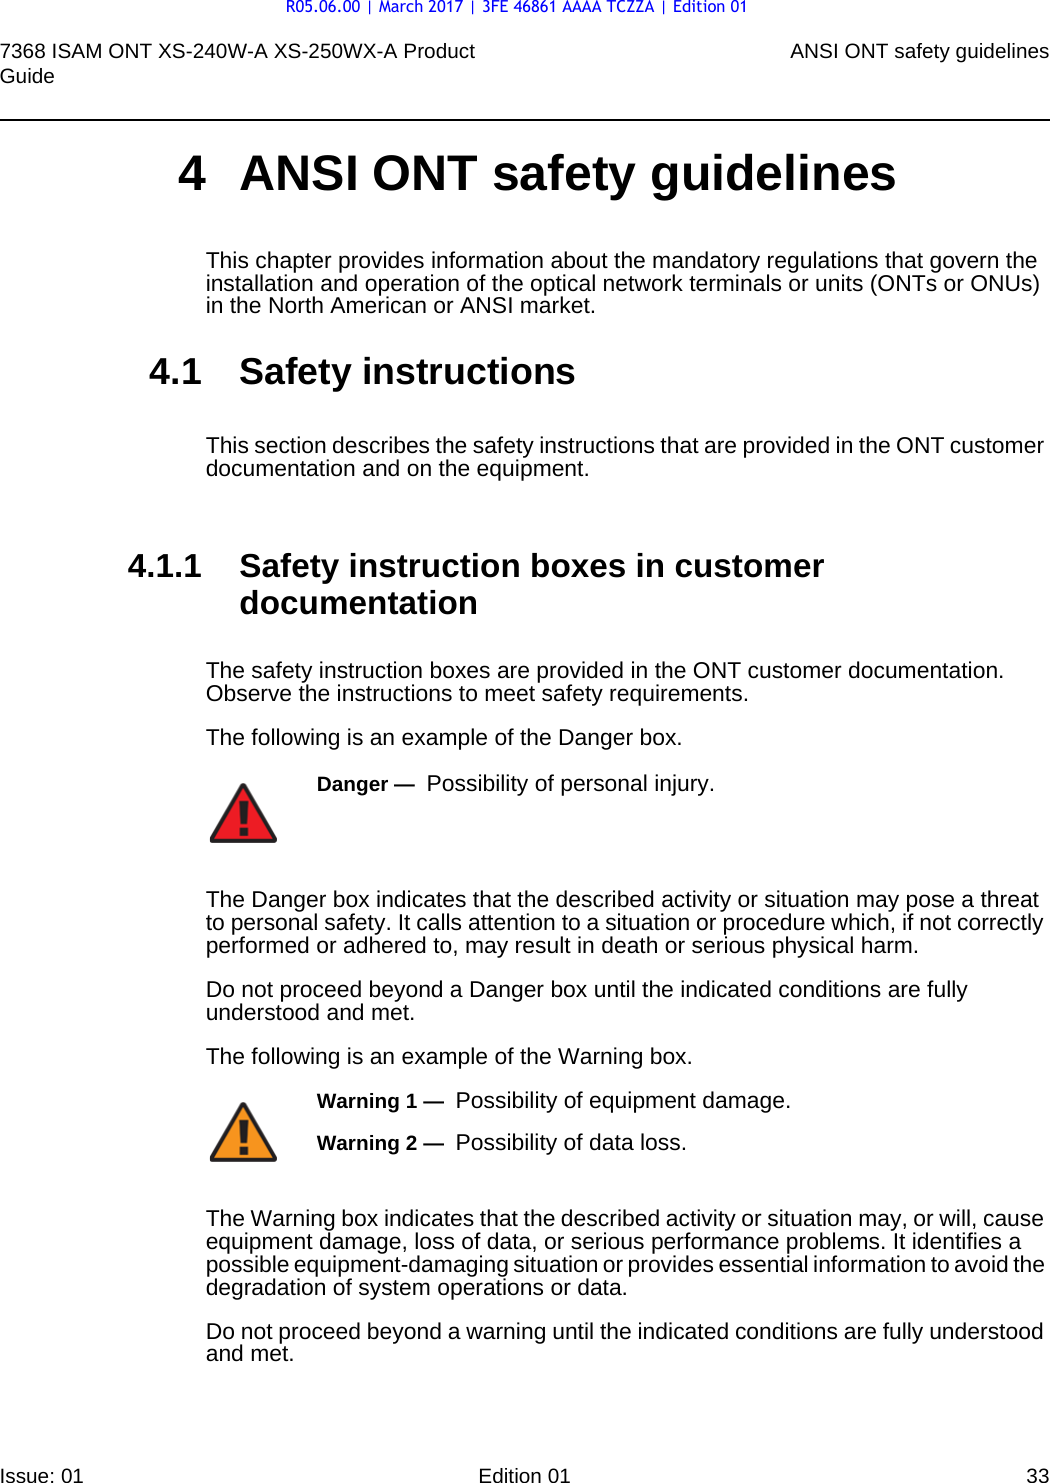 7368 ISAM ONT XS-240W-A XS-250WX-A Product Guide ANSI ONT safety guidelinesIssue: 01 Edition 01 33 4 ANSI ONT safety guidelinesThis chapter provides information about the mandatory regulations that govern the installation and operation of the optical network terminals or units (ONTs or ONUs) in the North American or ANSI market.4.1 Safety instructionsThis section describes the safety instructions that are provided in the ONT customer documentation and on the equipment.4.1.1 Safety instruction boxes in customer documentationThe safety instruction boxes are provided in the ONT customer documentation. Observe the instructions to meet safety requirements.The following is an example of the Danger box.The Danger box indicates that the described activity or situation may pose a threat to personal safety. It calls attention to a situation or procedure which, if not correctly performed or adhered to, may result in death or serious physical harm. Do not proceed beyond a Danger box until the indicated conditions are fully understood and met.The following is an example of the Warning box.The Warning box indicates that the described activity or situation may, or will, cause equipment damage, loss of data, or serious performance problems. It identifies a possible equipment-damaging situation or provides essential information to avoid the degradation of system operations or data.Do not proceed beyond a warning until the indicated conditions are fully understood and met.Danger —  Possibility of personal injury. Warning 1 —  Possibility of equipment damage.Warning 2 —  Possibility of data loss.R05.06.00 | March 2017 | 3FE 46861 AAAA TCZZA | Edition 01